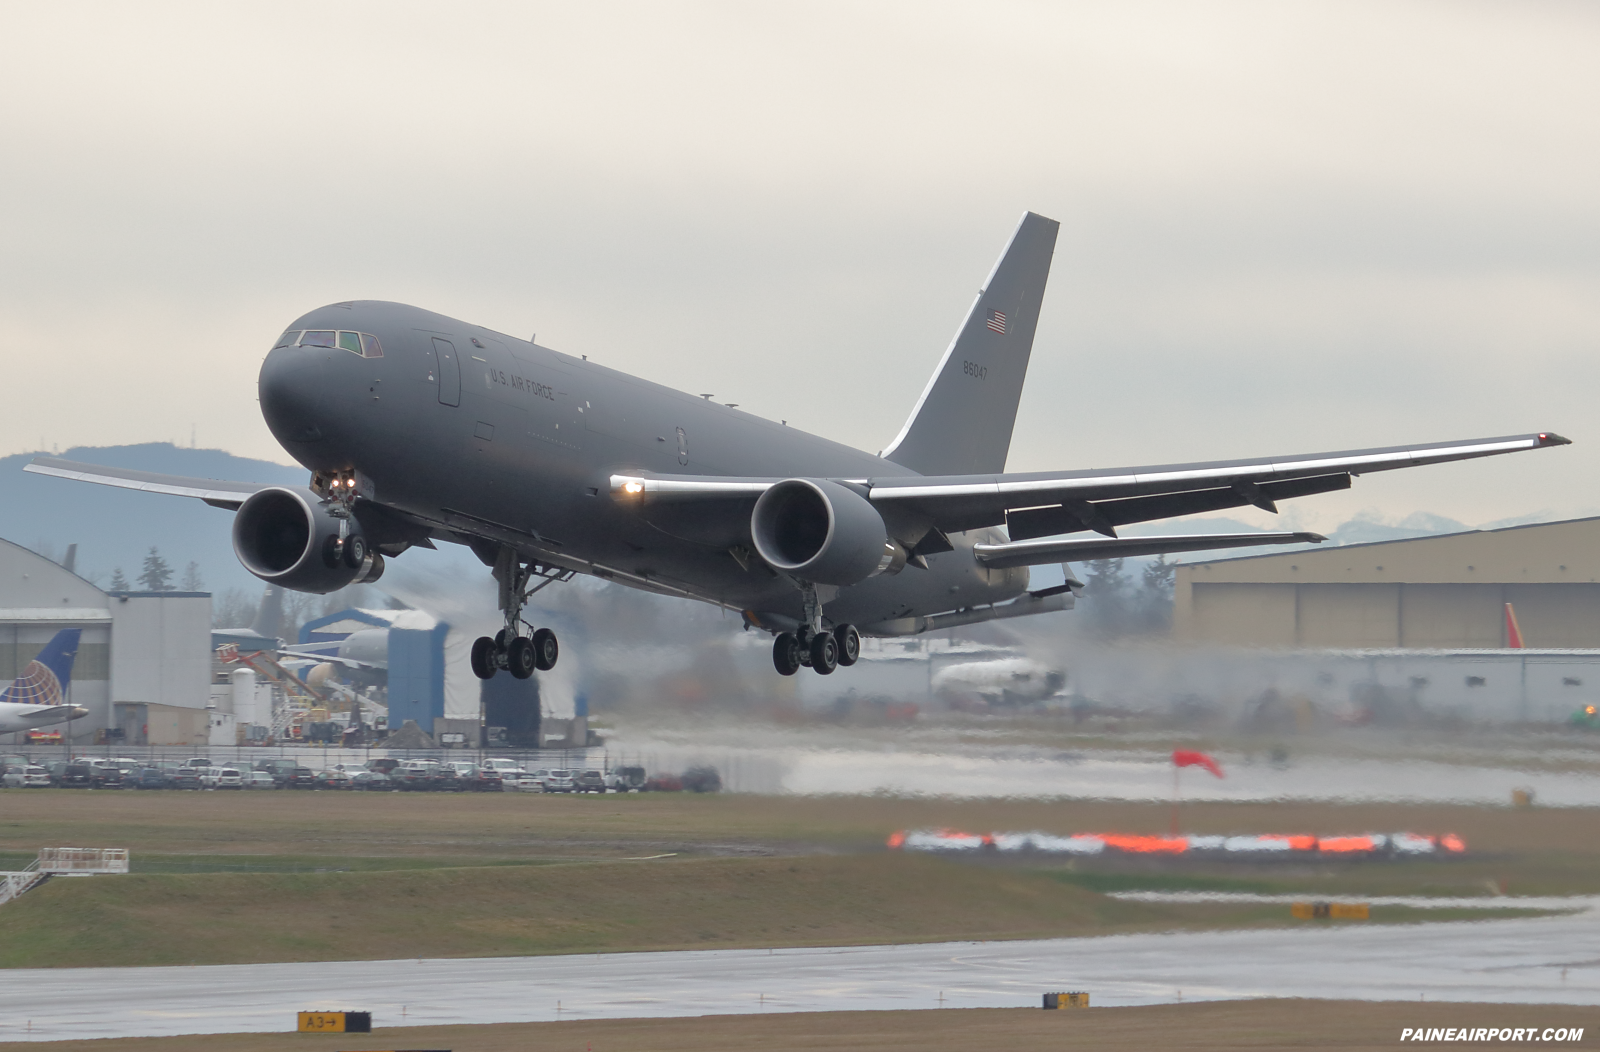 KC-46A 18-46047 at Paine Field